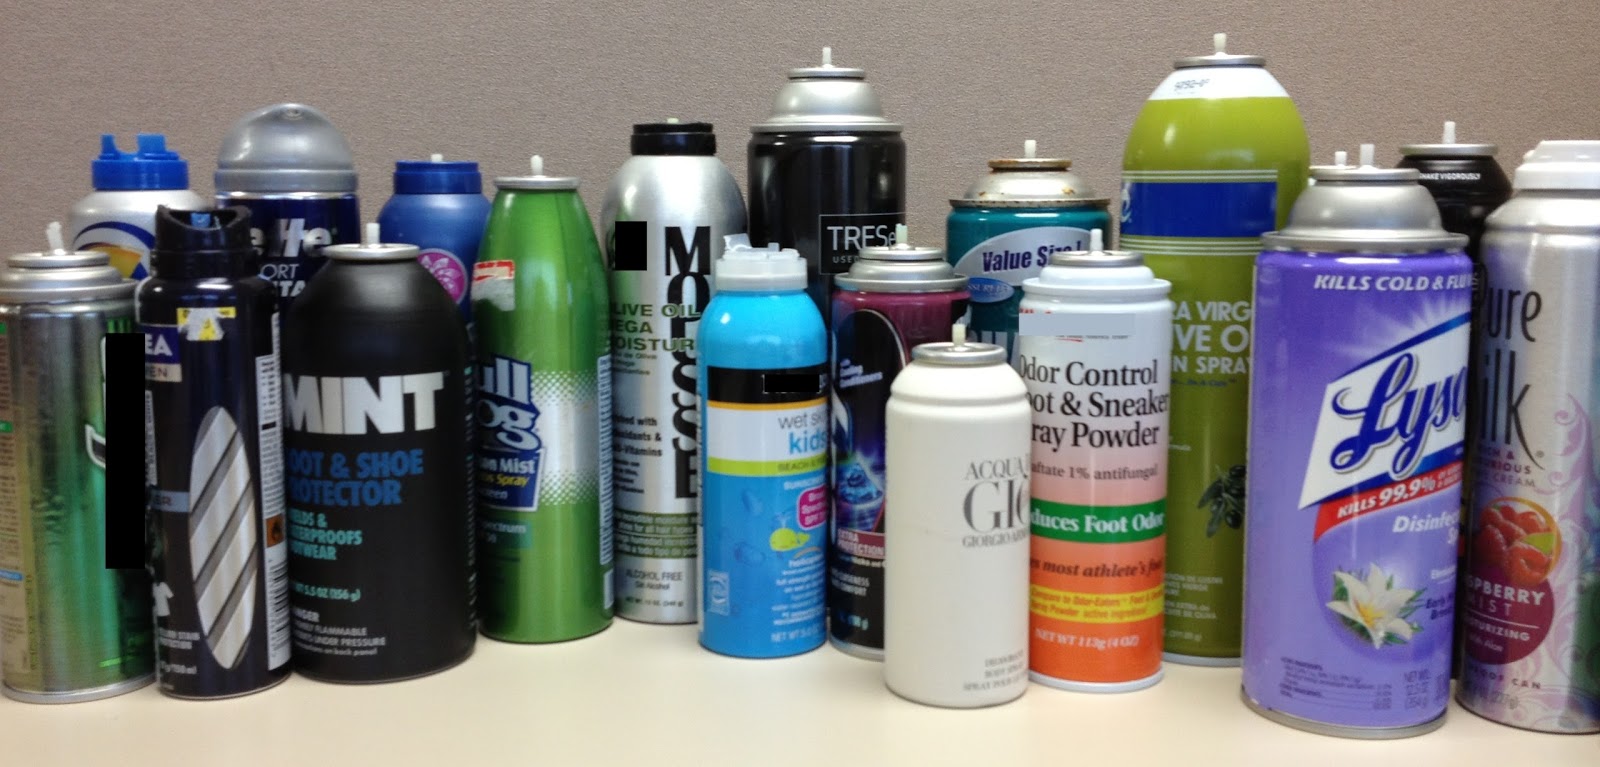 These are samples of several aerosol items that did not make it past the checkpoint in carry-on baggage and were surrendered to TSA at the checkpoint. 